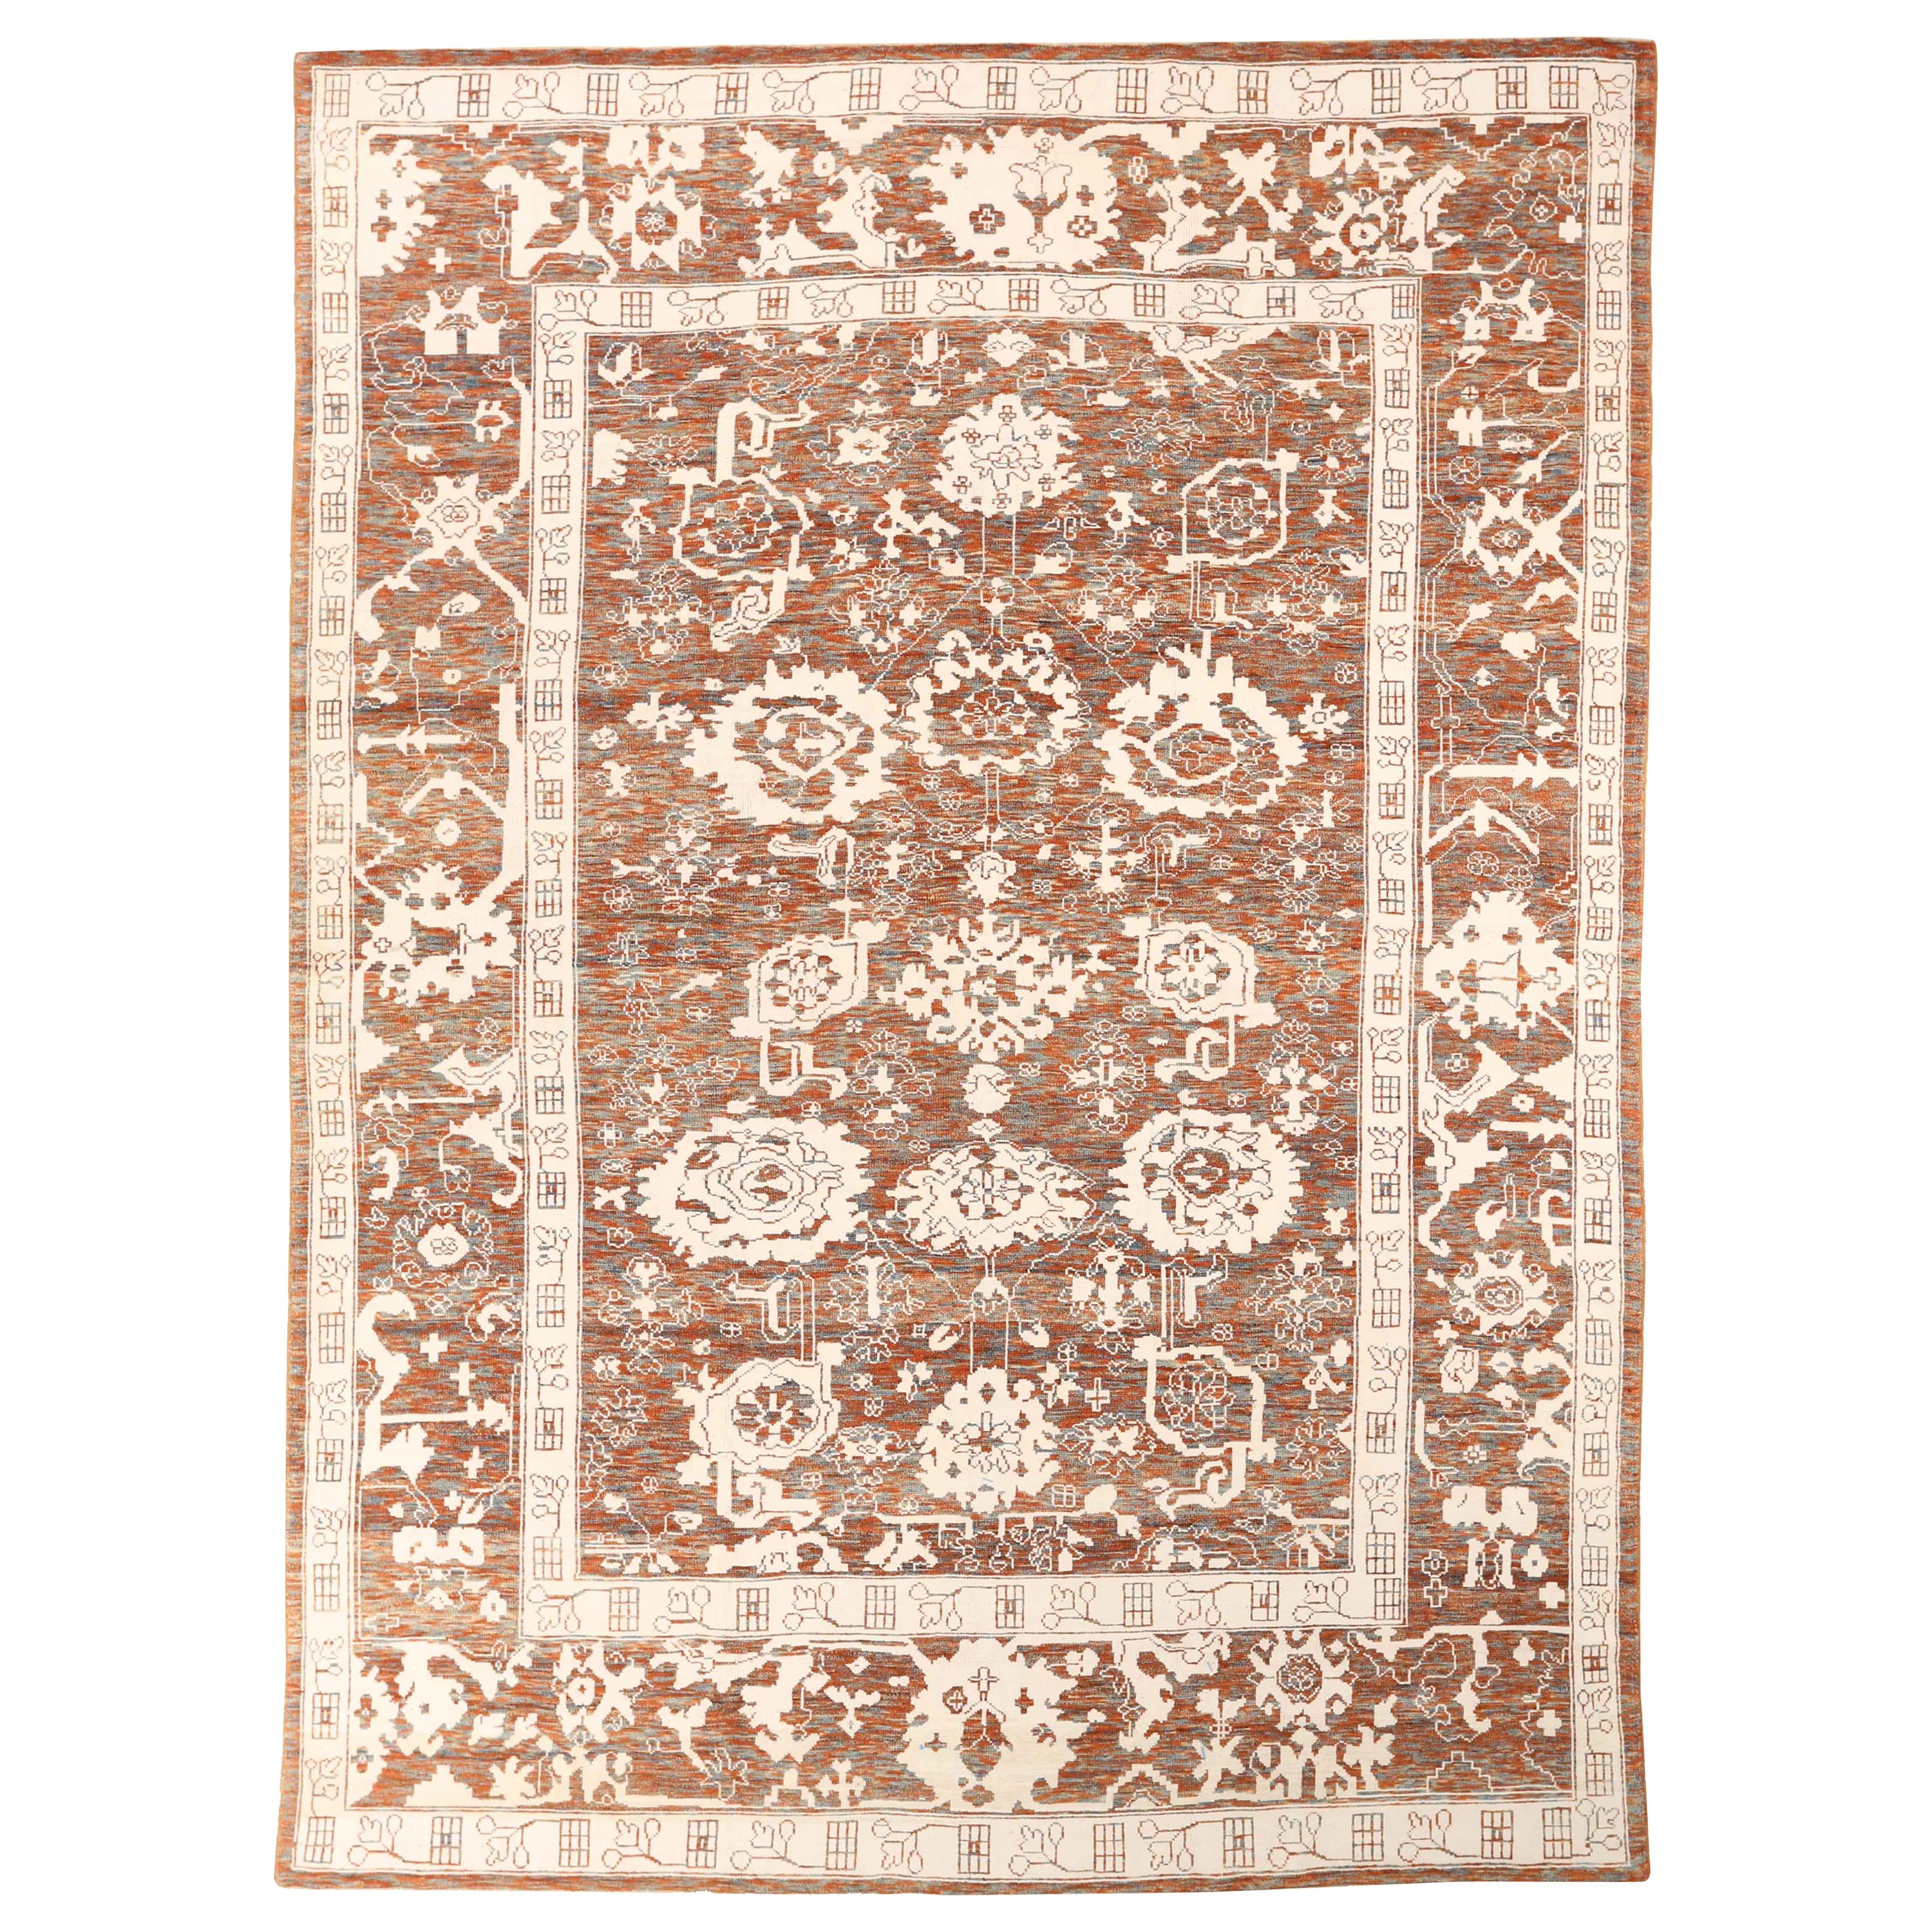 Modern Persian Oushak Rug in Rust Color with White and Green Floral Details